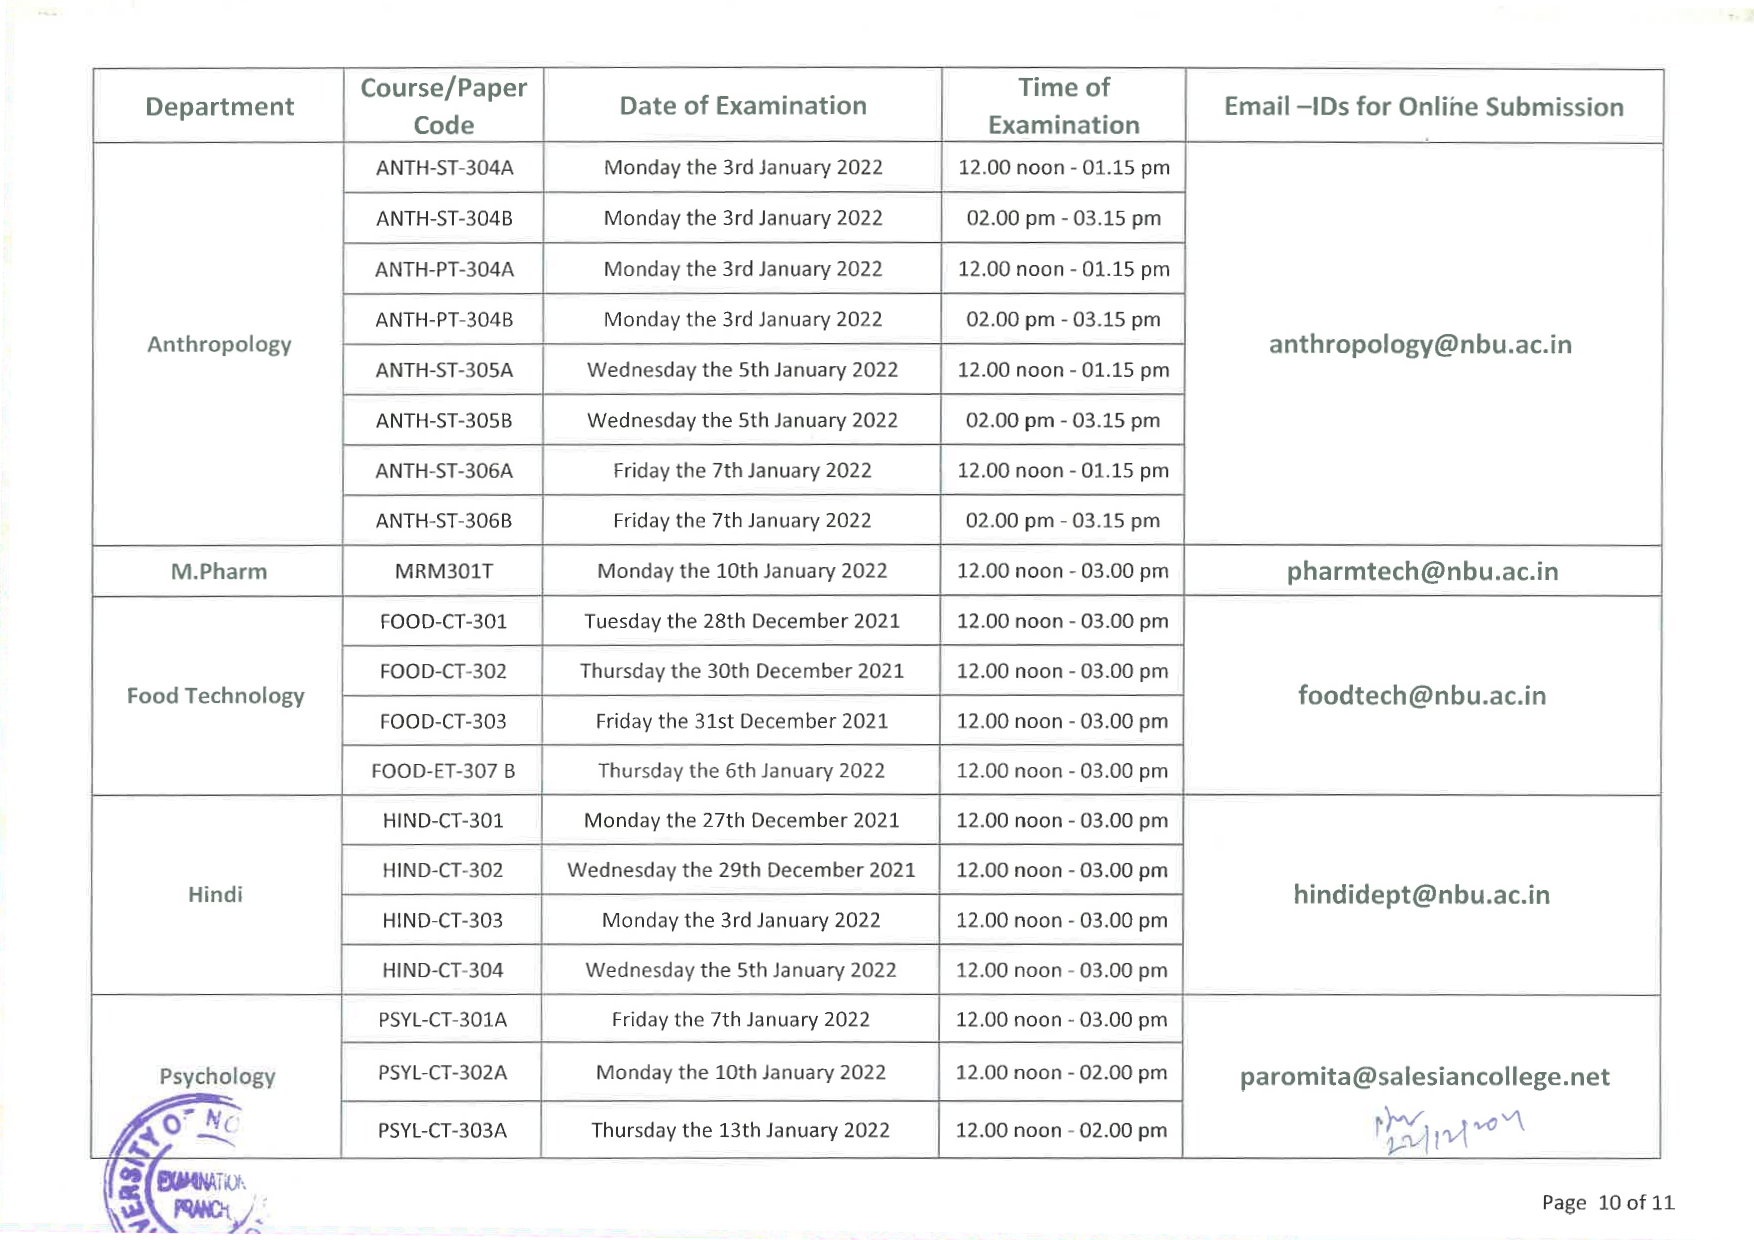 EXAM SCHEDULE FOR LL.M SEMESTER III (PAGE 10)